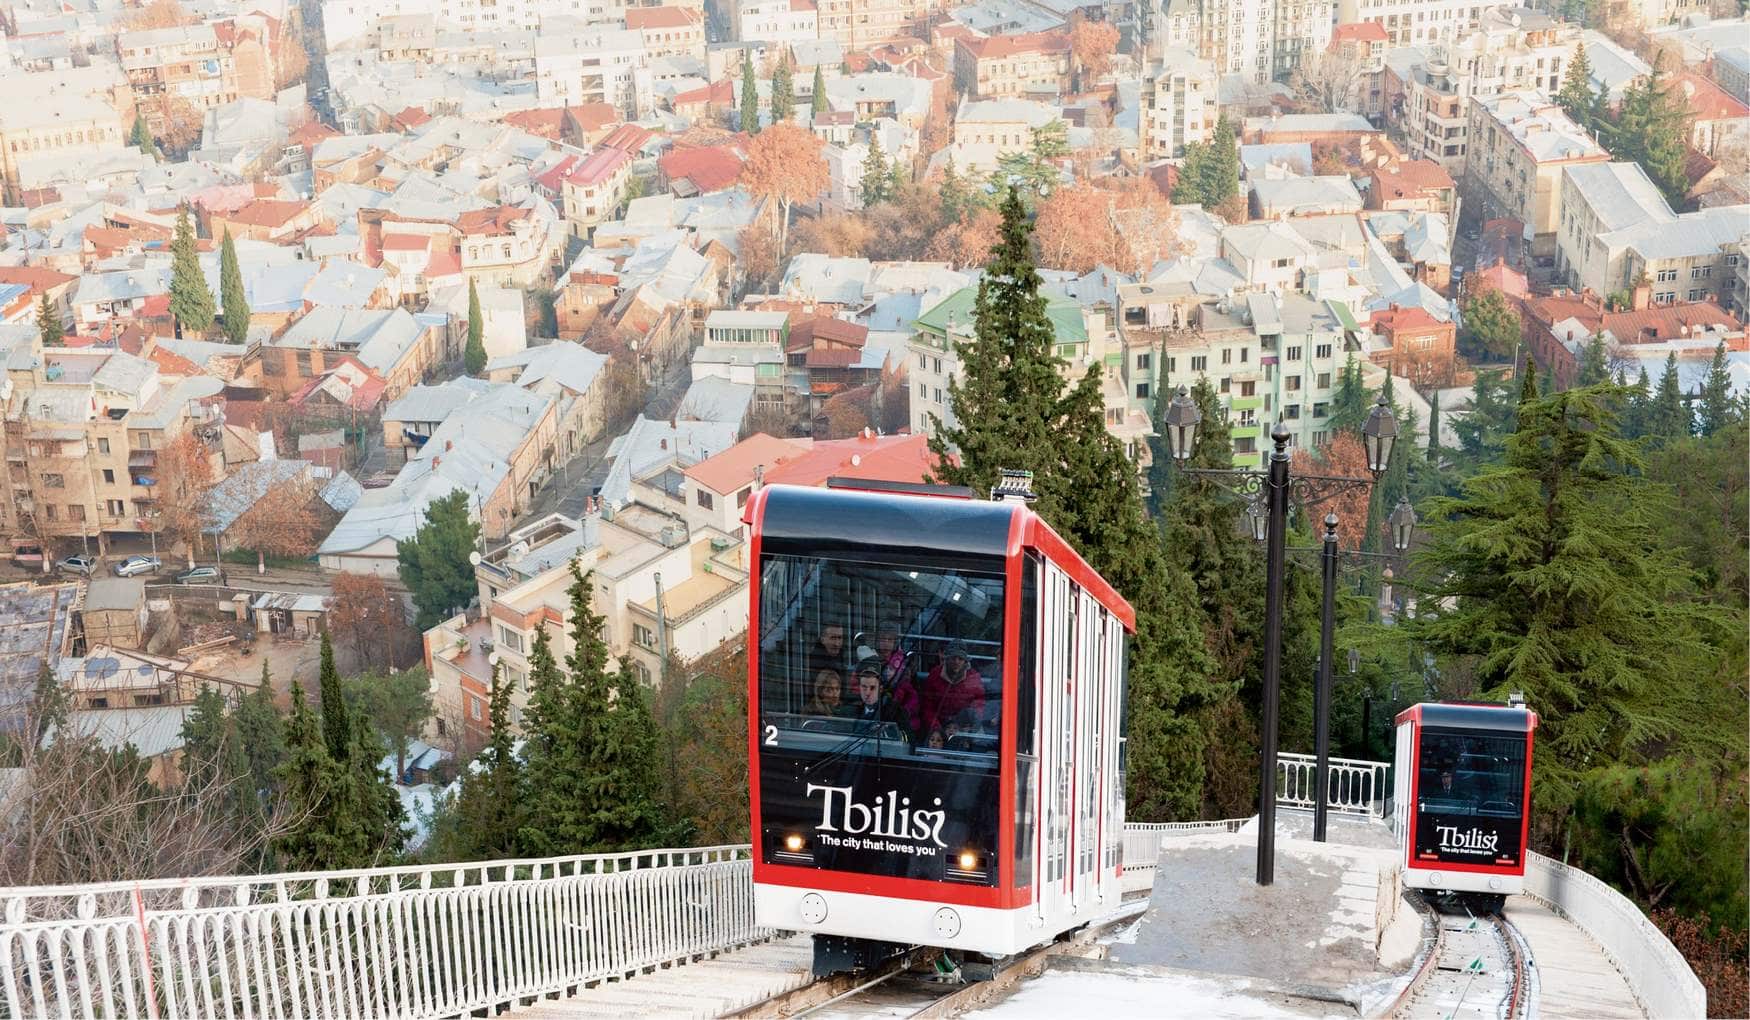 The Tbilisi Funicular: A Thrilling Ride Through Georgia's History